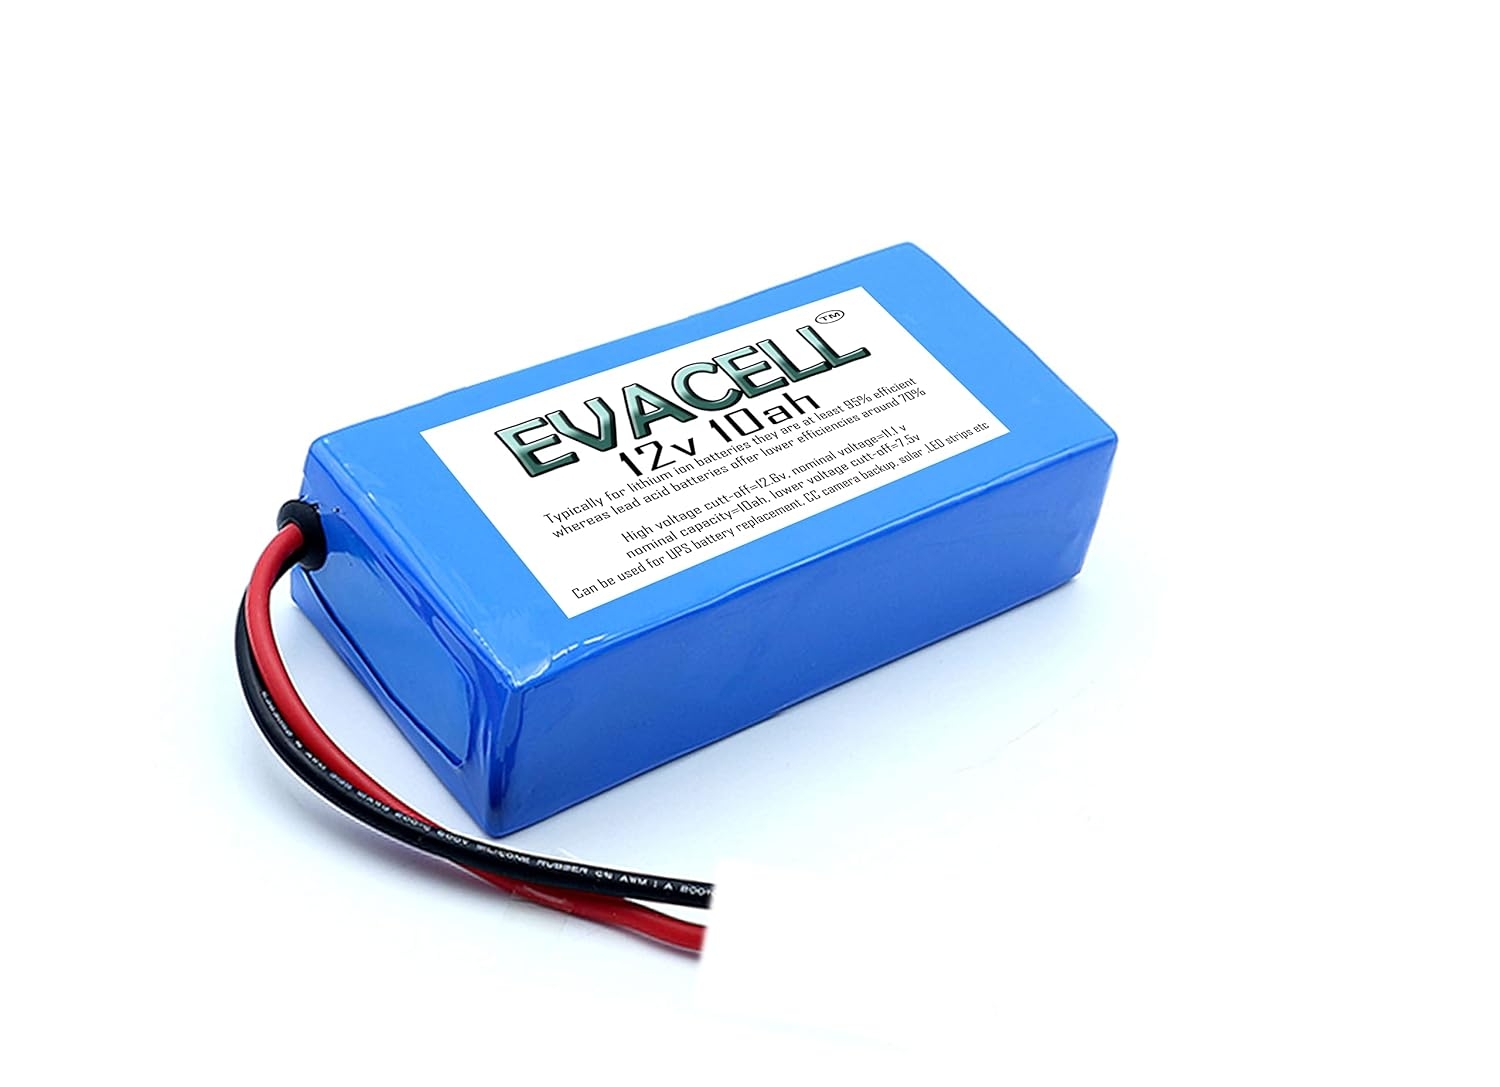 EVACELL 12V 10AH 10000 MAh Lithium Ion Rechargeable Battery with BMS Protection for Camera Backup, UPS, Solar/LED Light